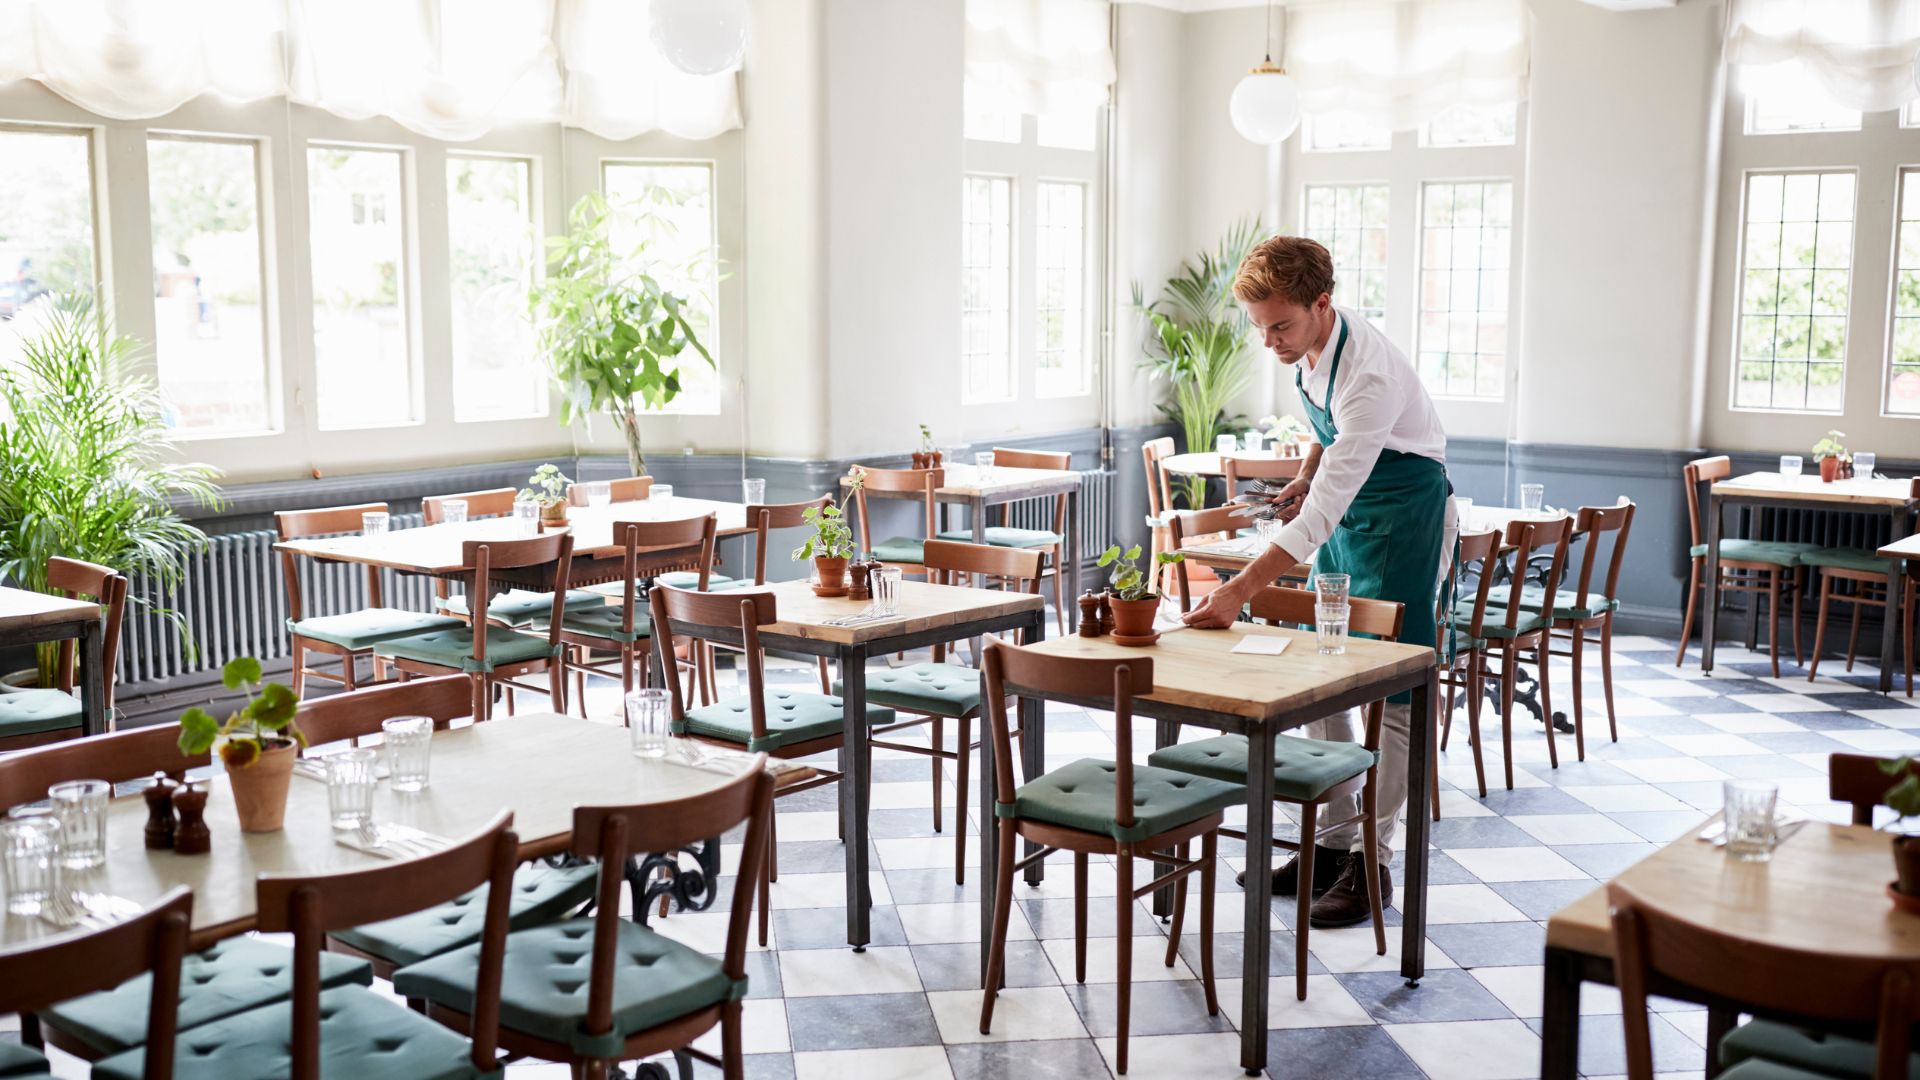 10 Tips for boosting restaurant sales during the slow season